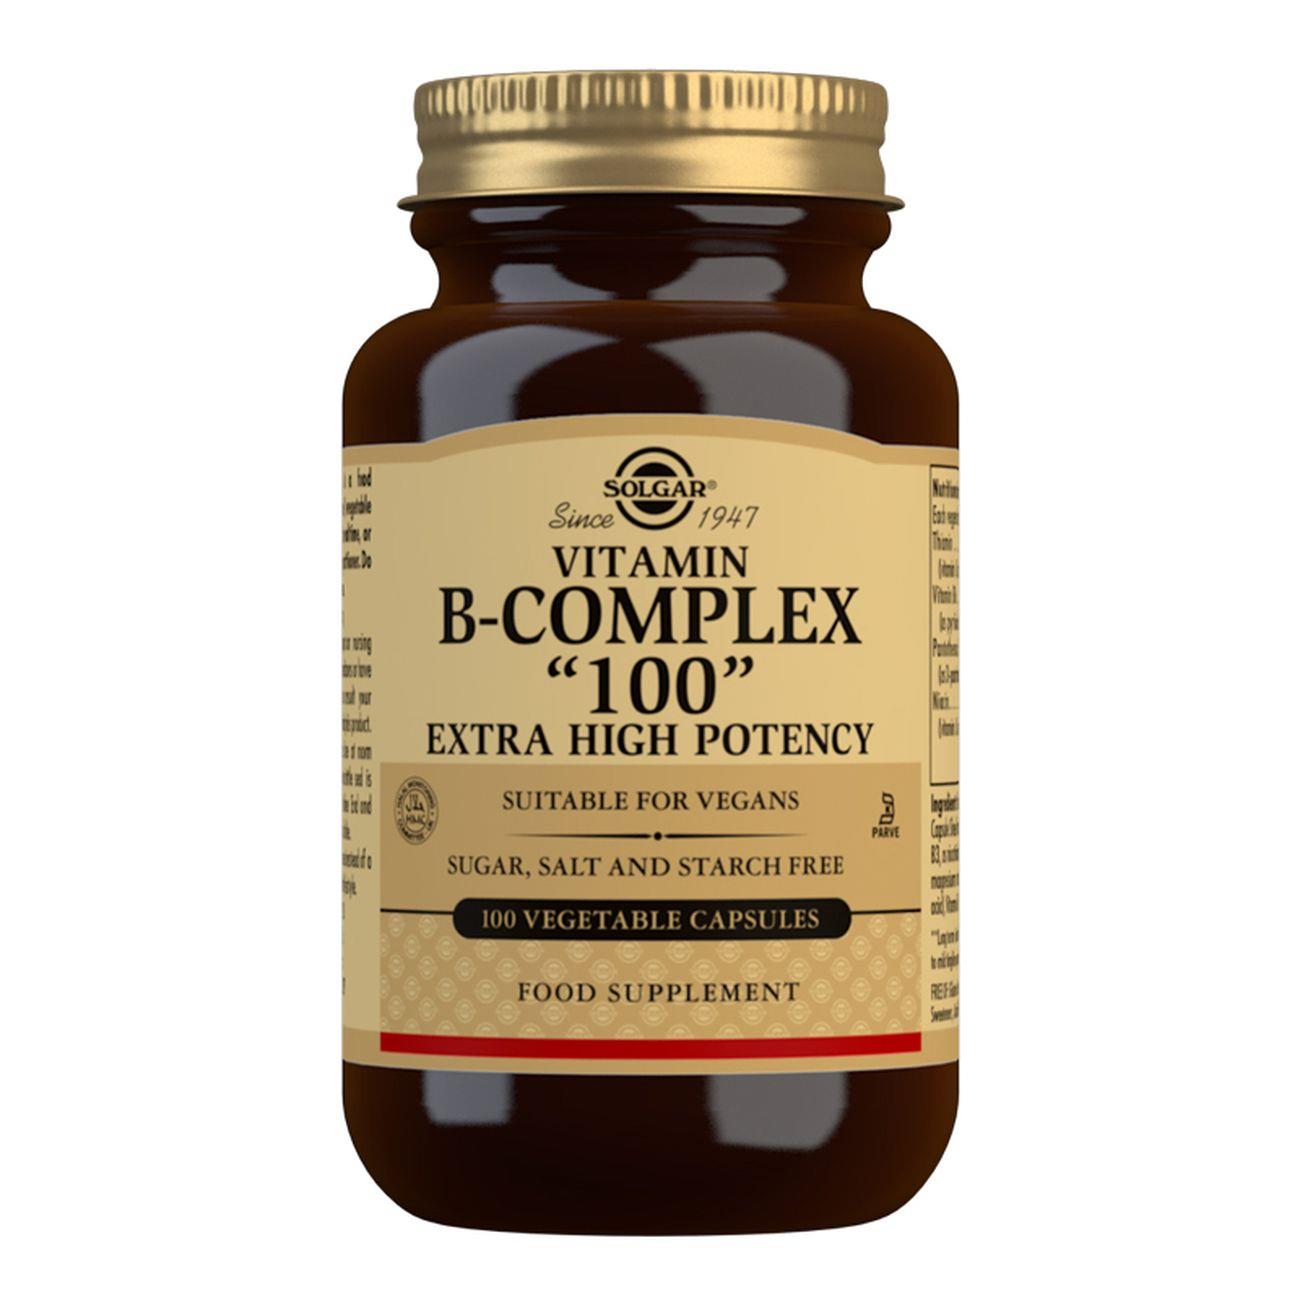 Vitamin B-Complex "100" Extra High Potency - 100 Vegetable Capsules